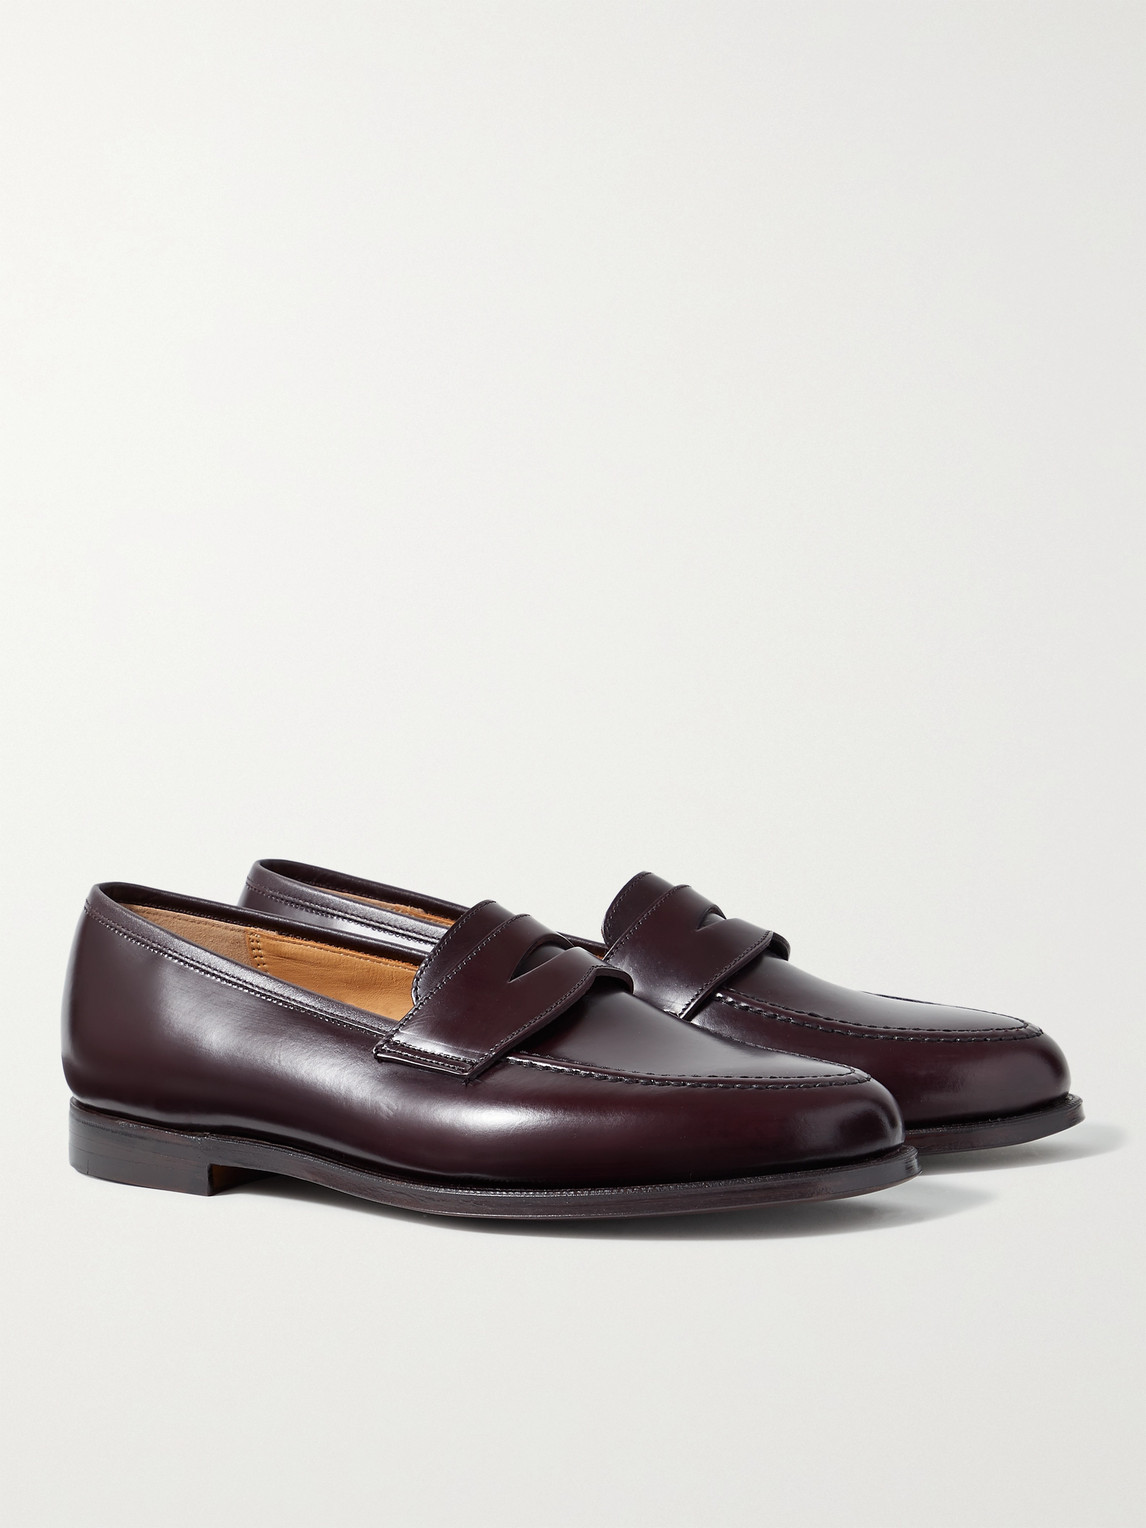 George Cleverley Bradley Leather Penny Loafers In Burgundy